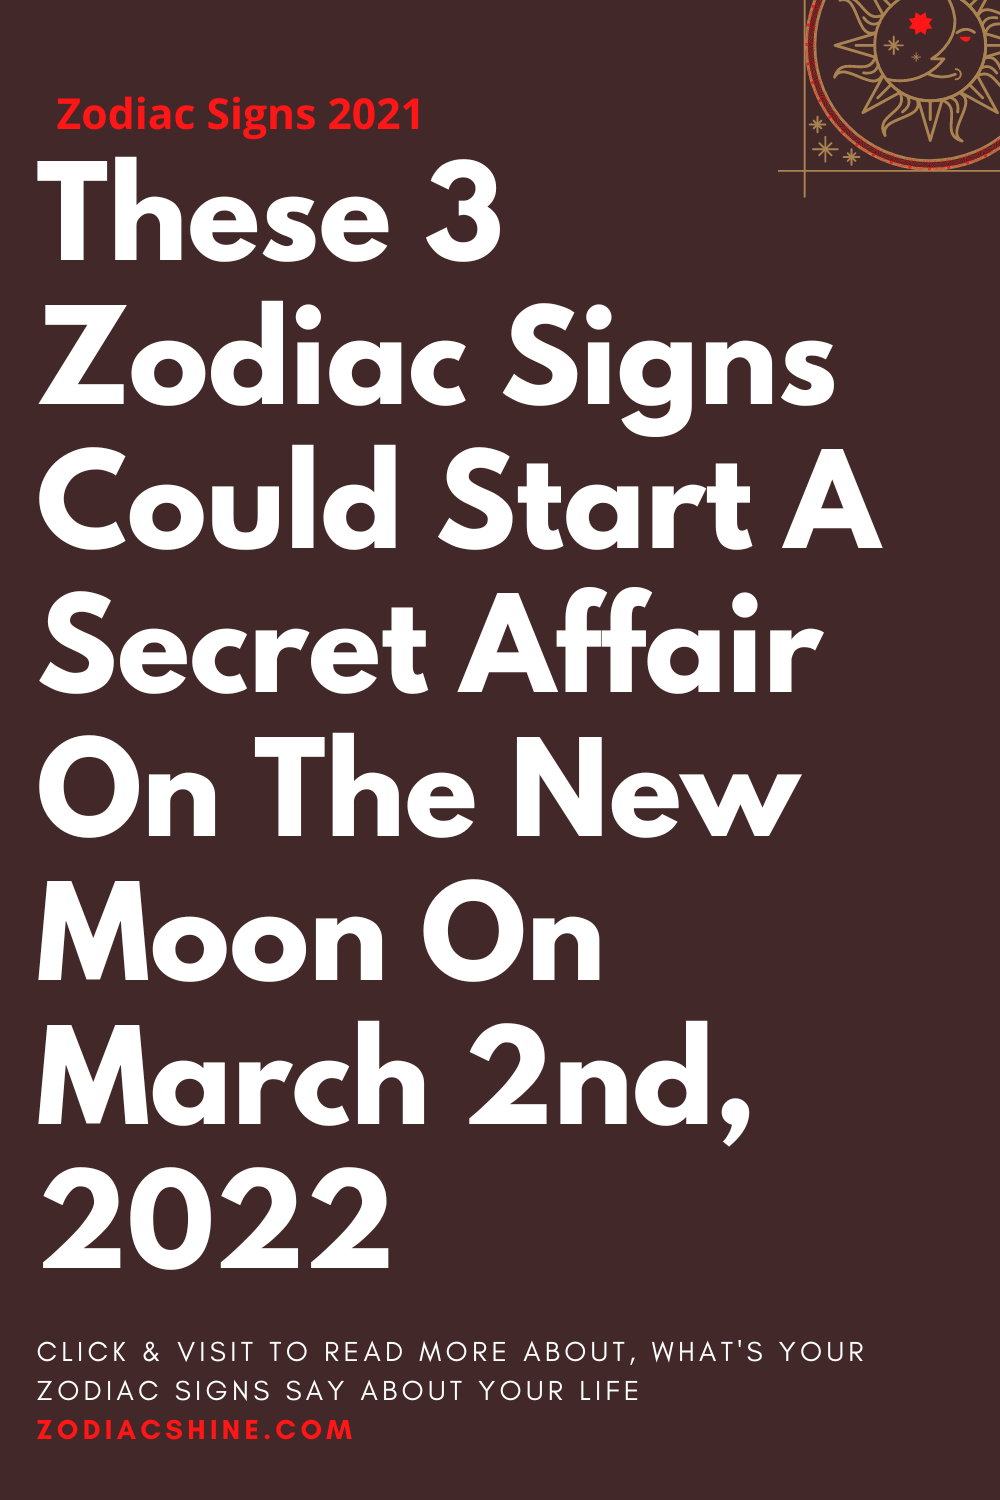 These 3 Zodiac Signs Could Start A Secret Affair On The New Moon On March 2nd 2022